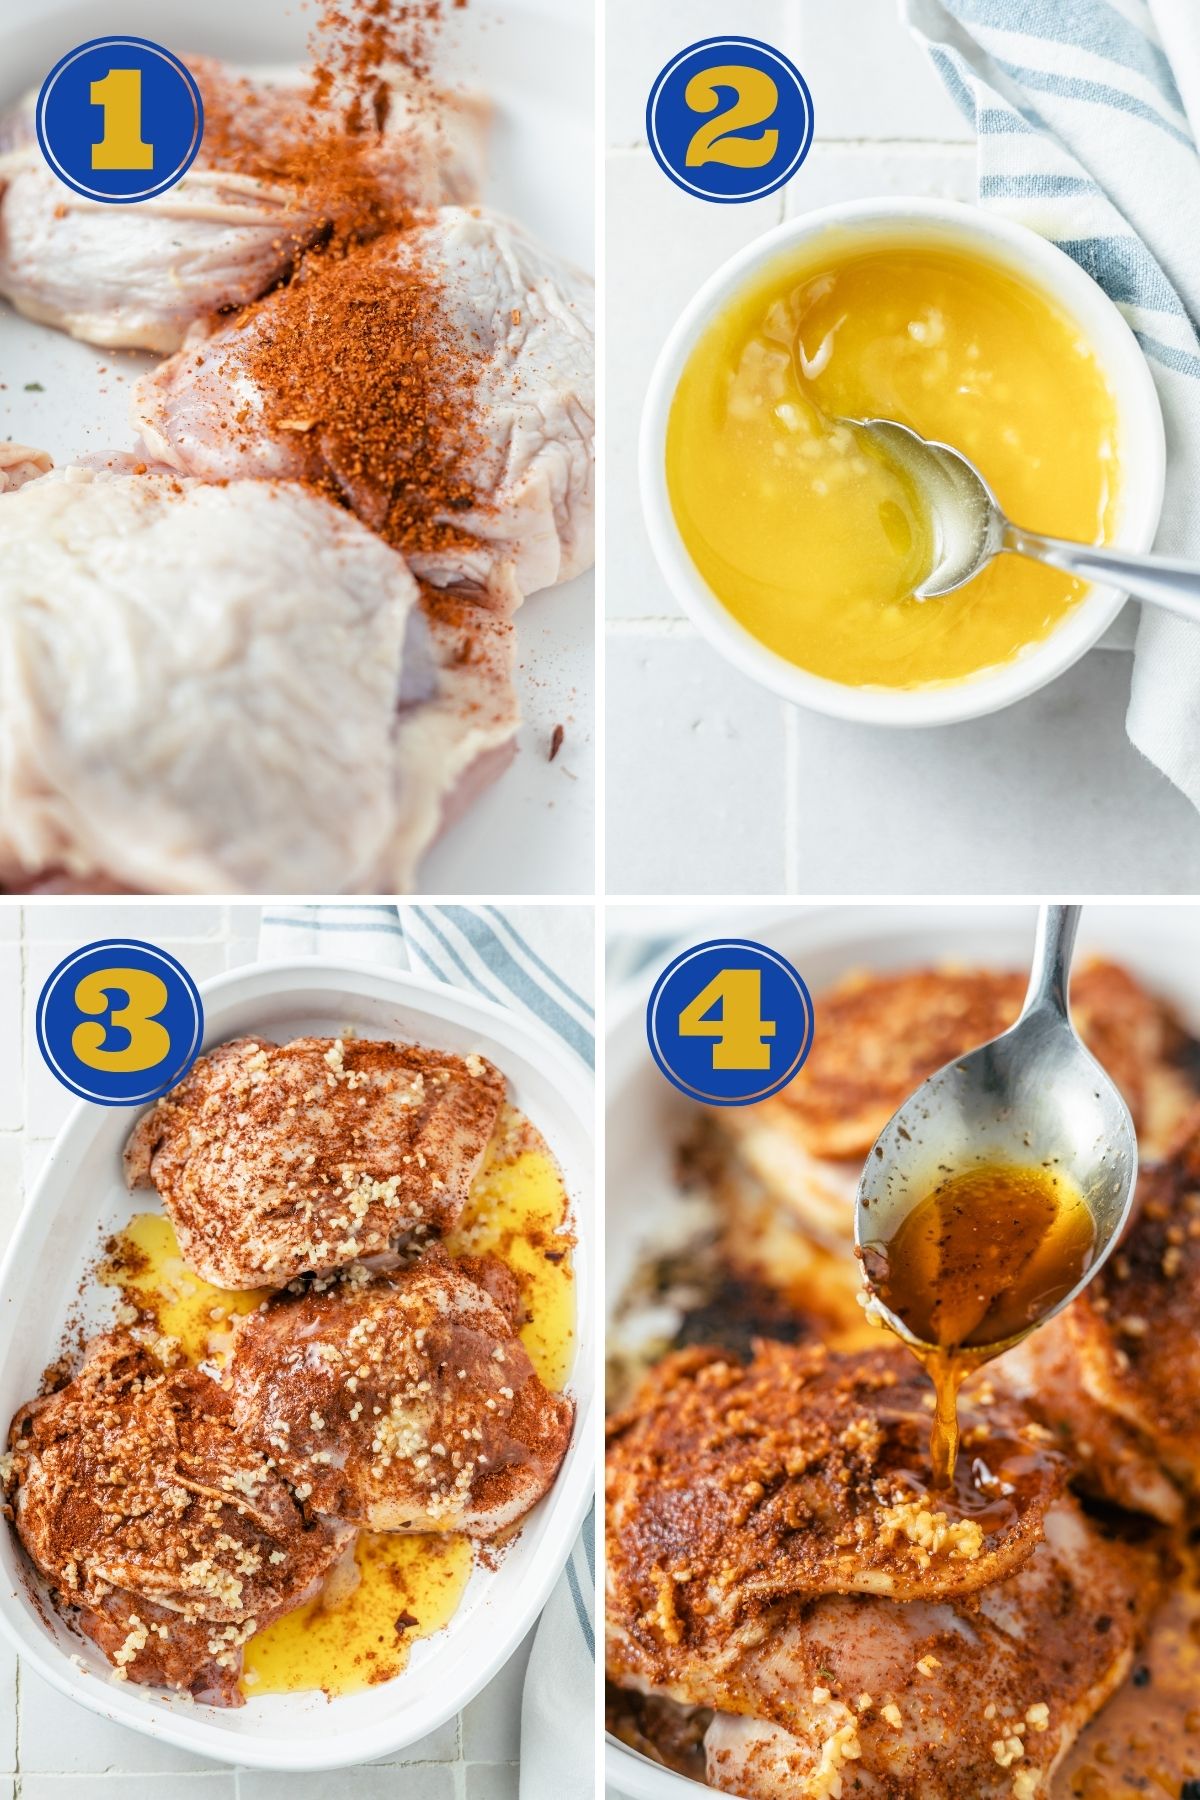 photo collage of 4 steps to make Baked Cajun Chicken by rubbing a homemade cajun seasoning mix over chicken thighs, mixing garlic butter, and pouring it over the chicken in a baking dish, then basting the chicken to have juicy meat. 